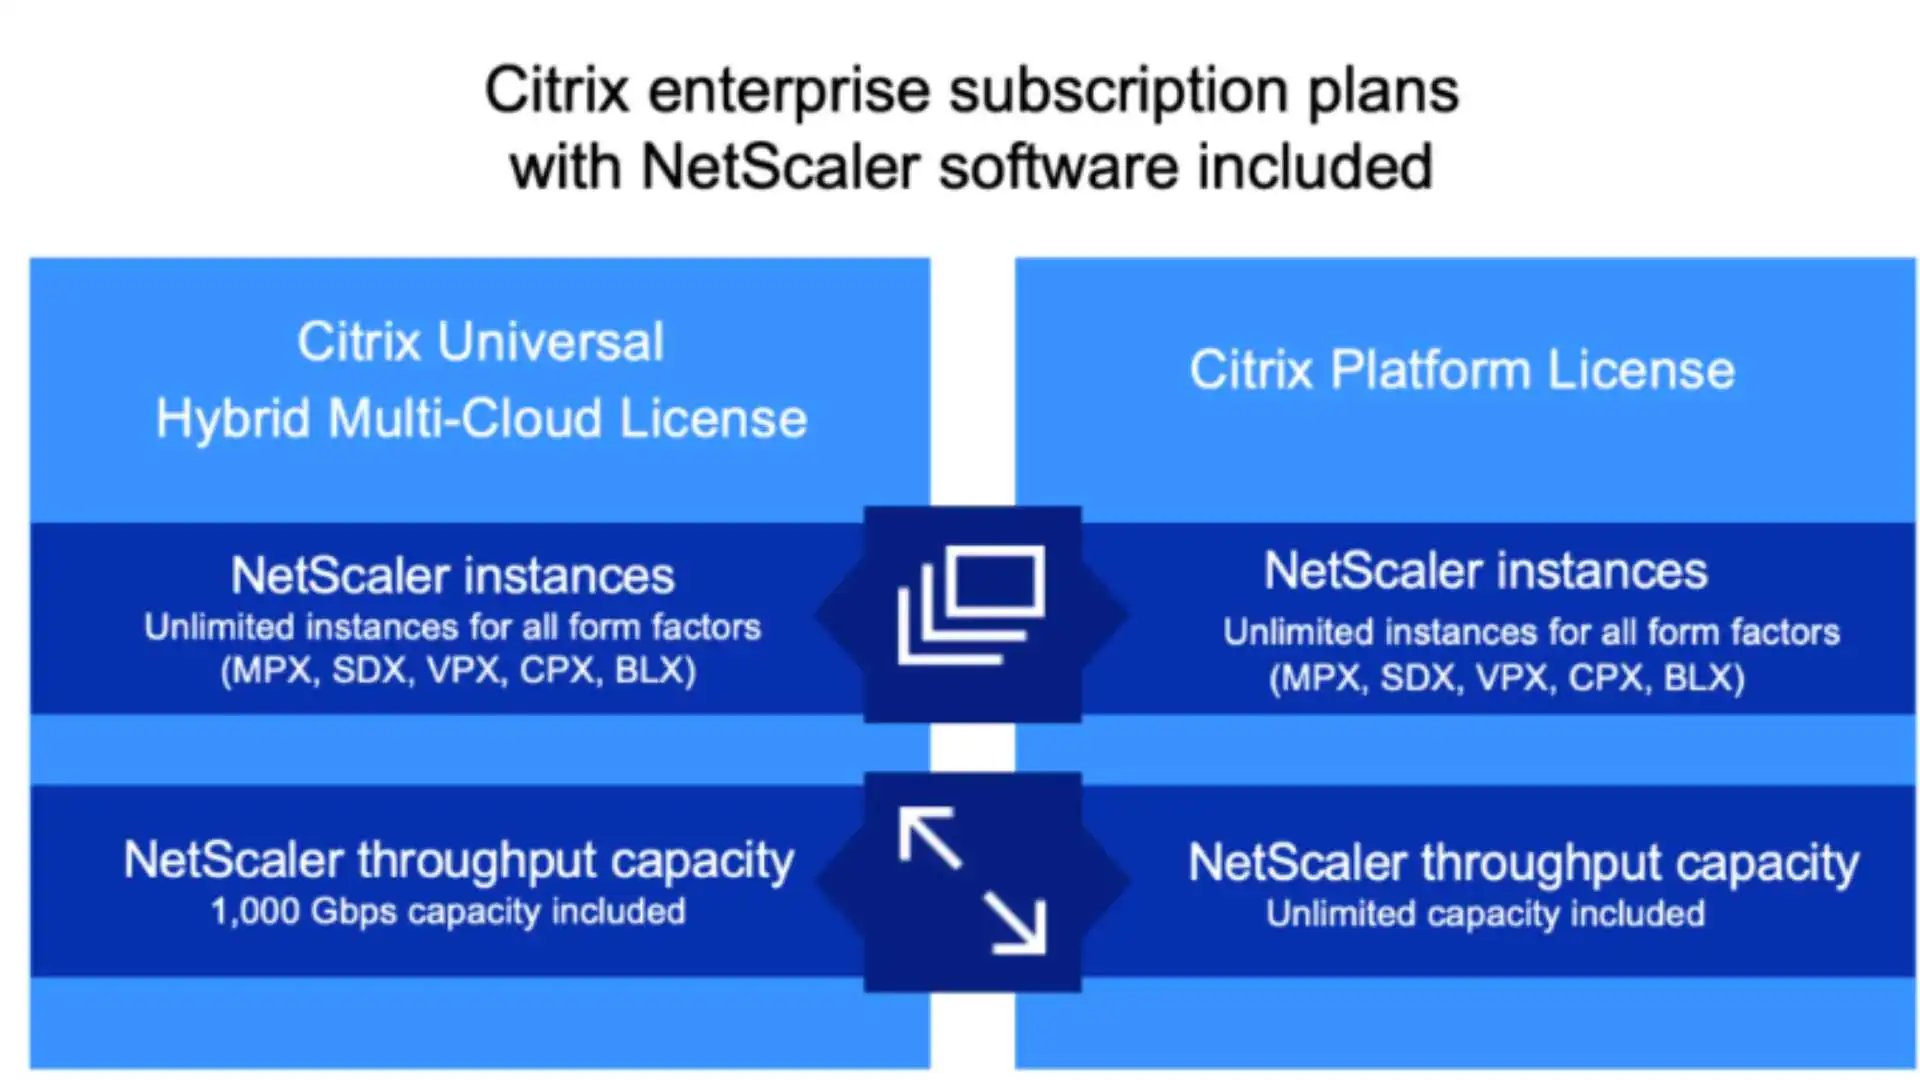 NetScaler  Software included in Citrix Enterprise Subscription